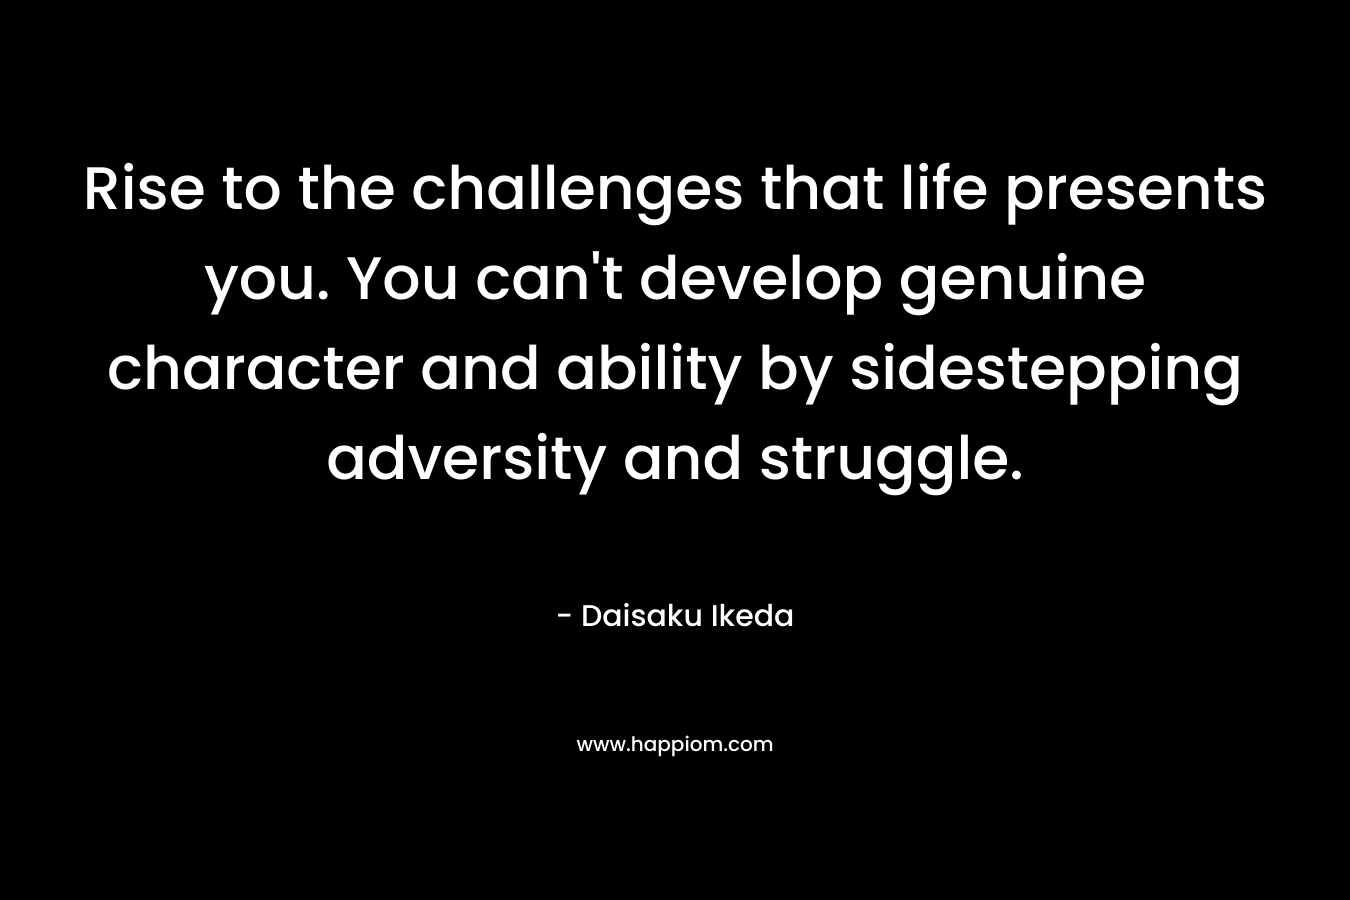 Rise to the challenges that life presents you. You can’t develop genuine character and ability by sidestepping adversity and struggle. – Daisaku Ikeda